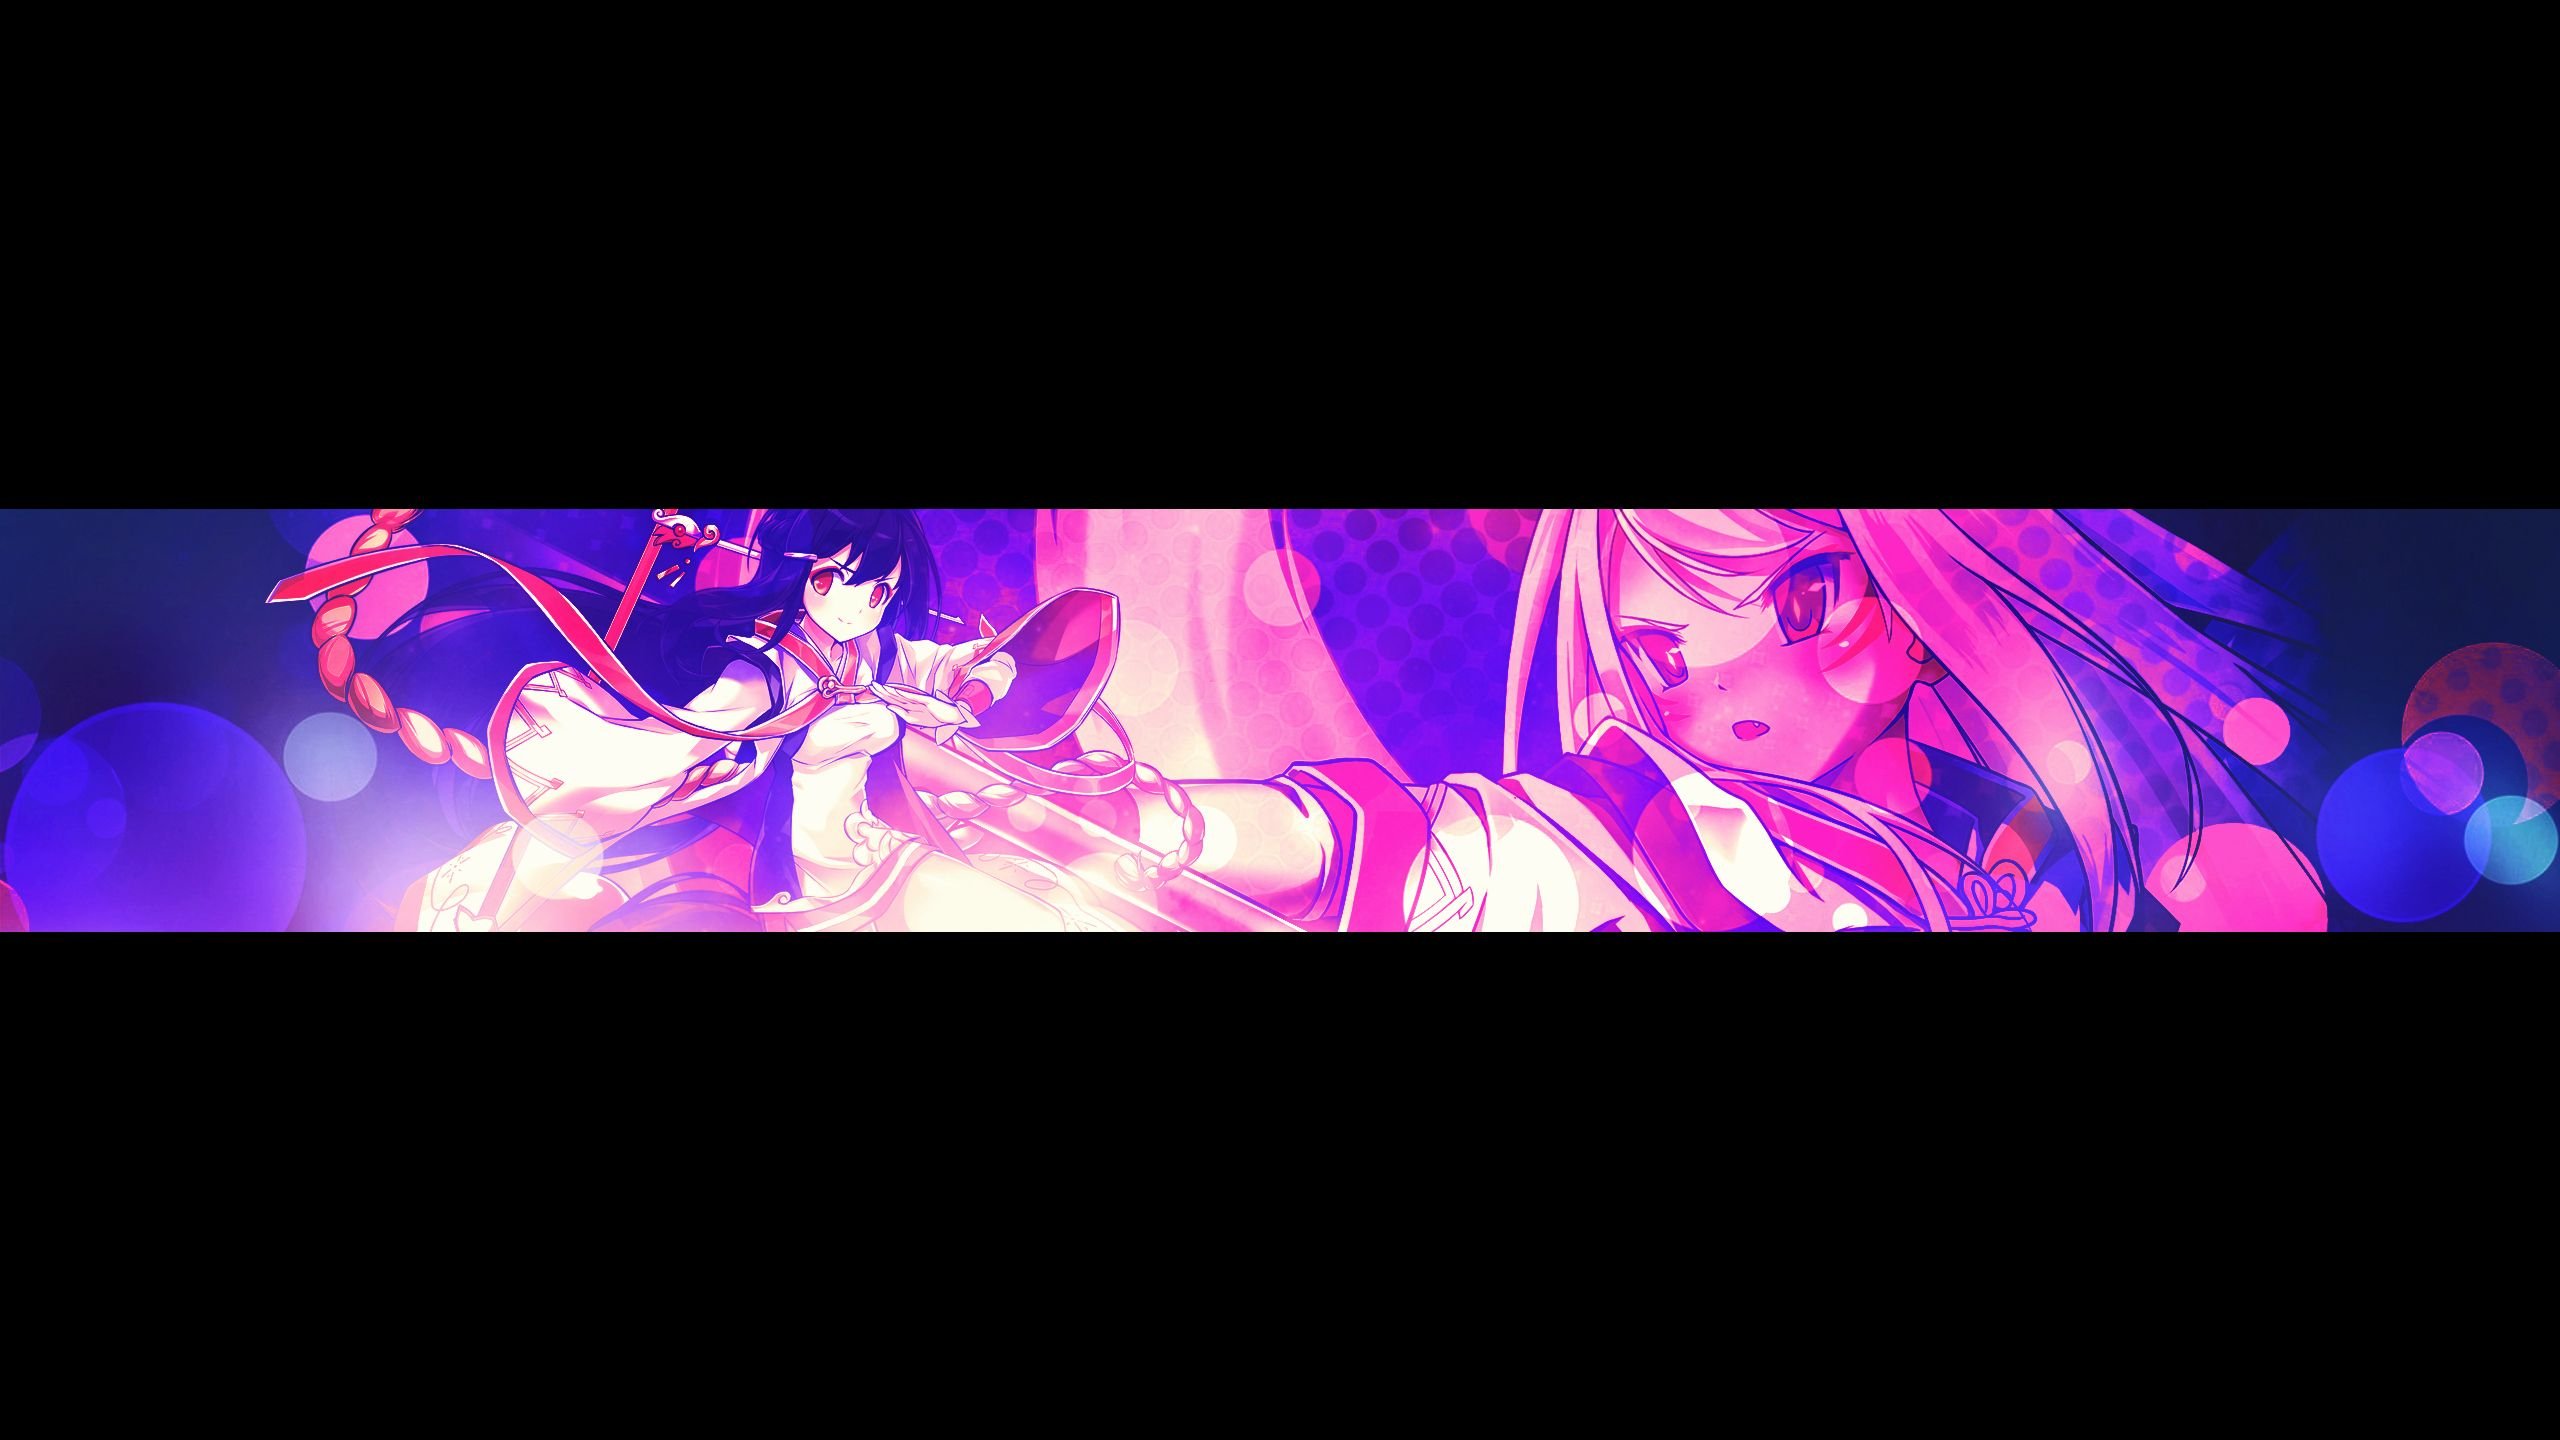 2560x1440 Youtube Banner Template No Text Awesome Anime Youtube Banner Template No Text | Youtube banner template, Youtube banners, Youtube channel art